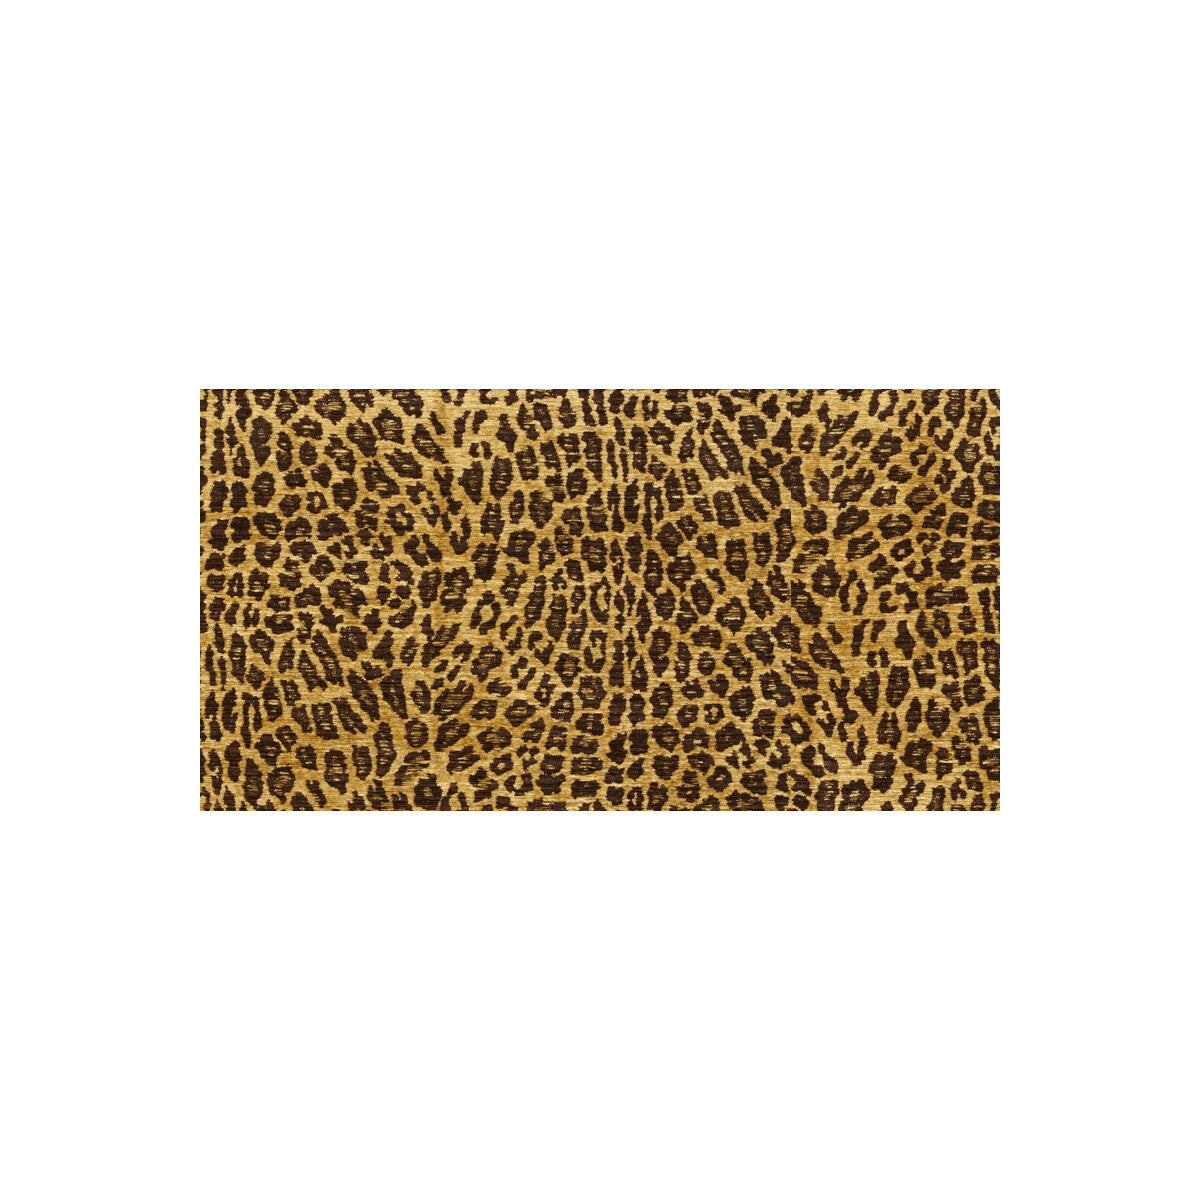 Savvy Safari fabric in leopard color - pattern 32761.640.0 - by Kravet Couture